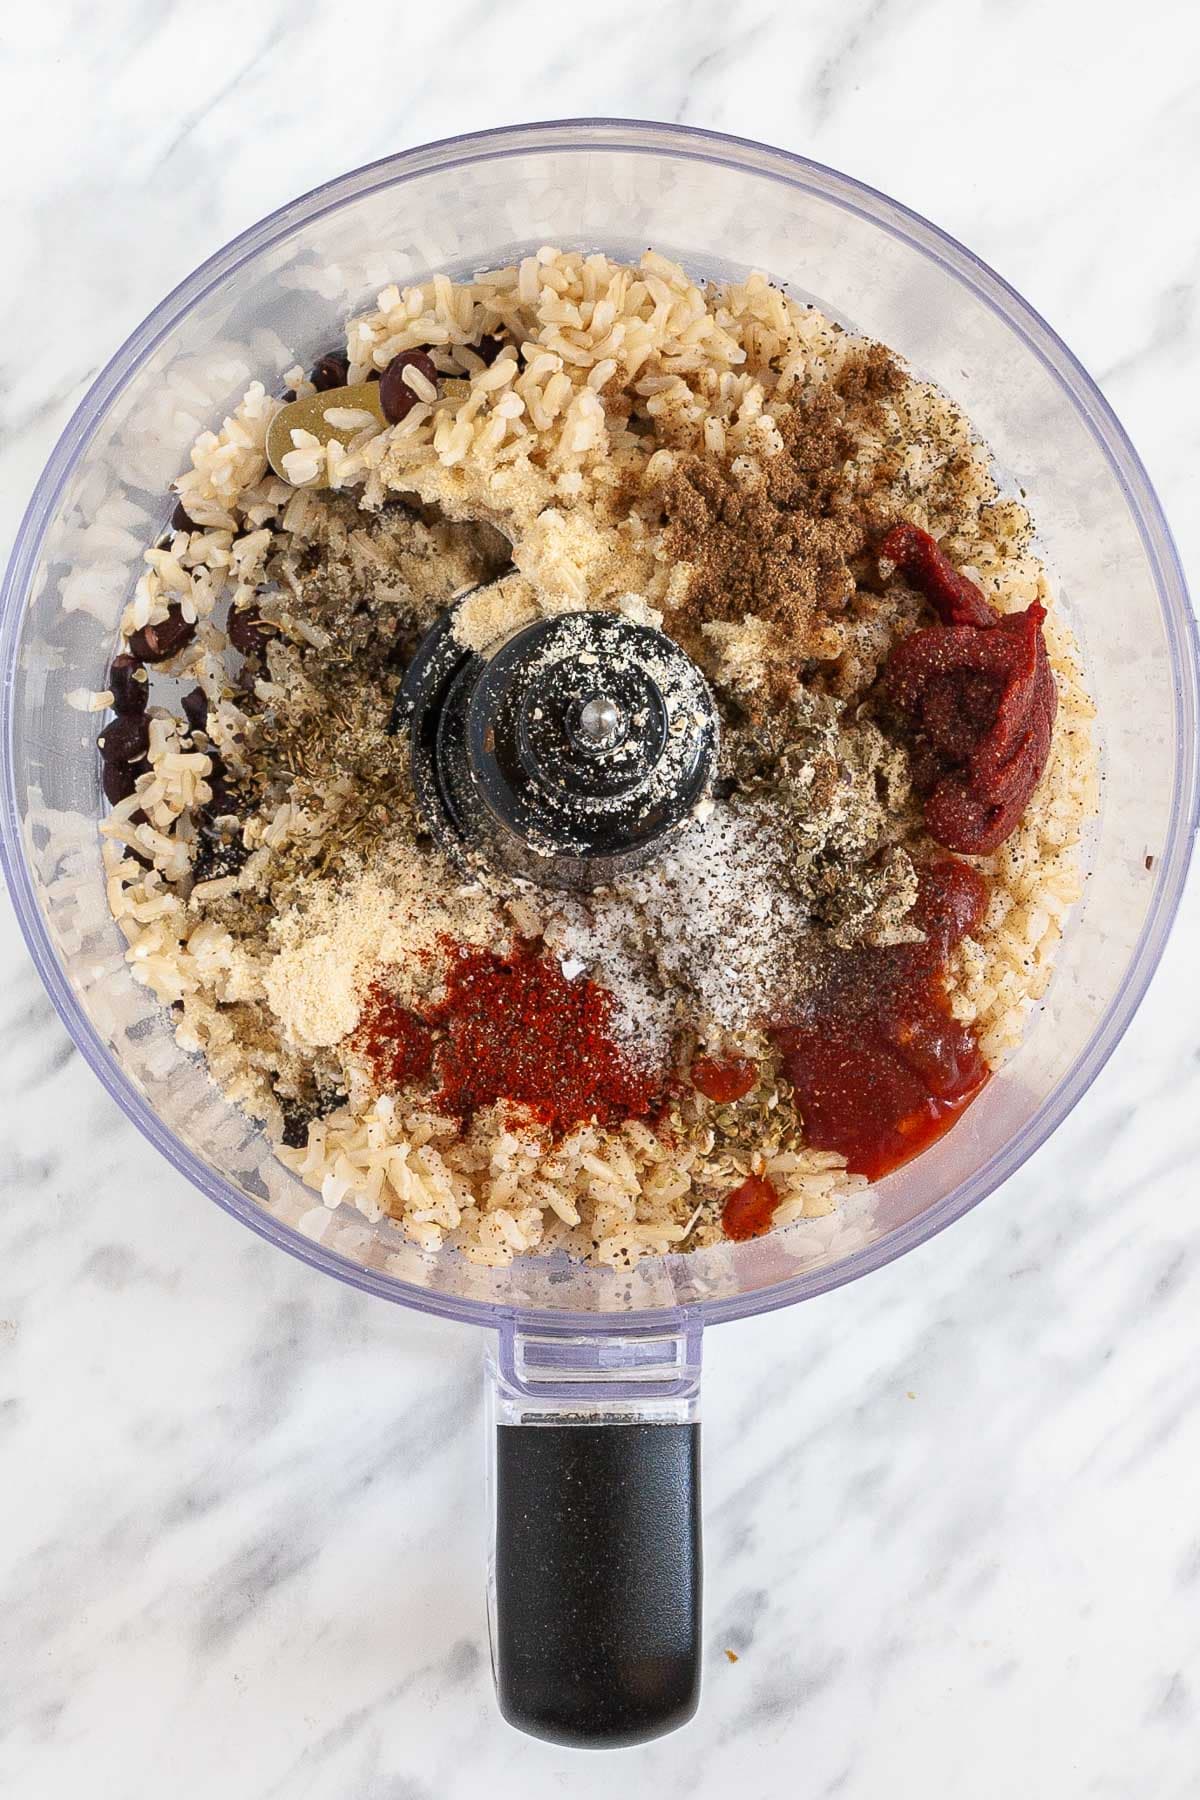 A food processor with the ingredients of this chipotle black bean burger. Rice, tomato paste, black beans and other spices are visible.